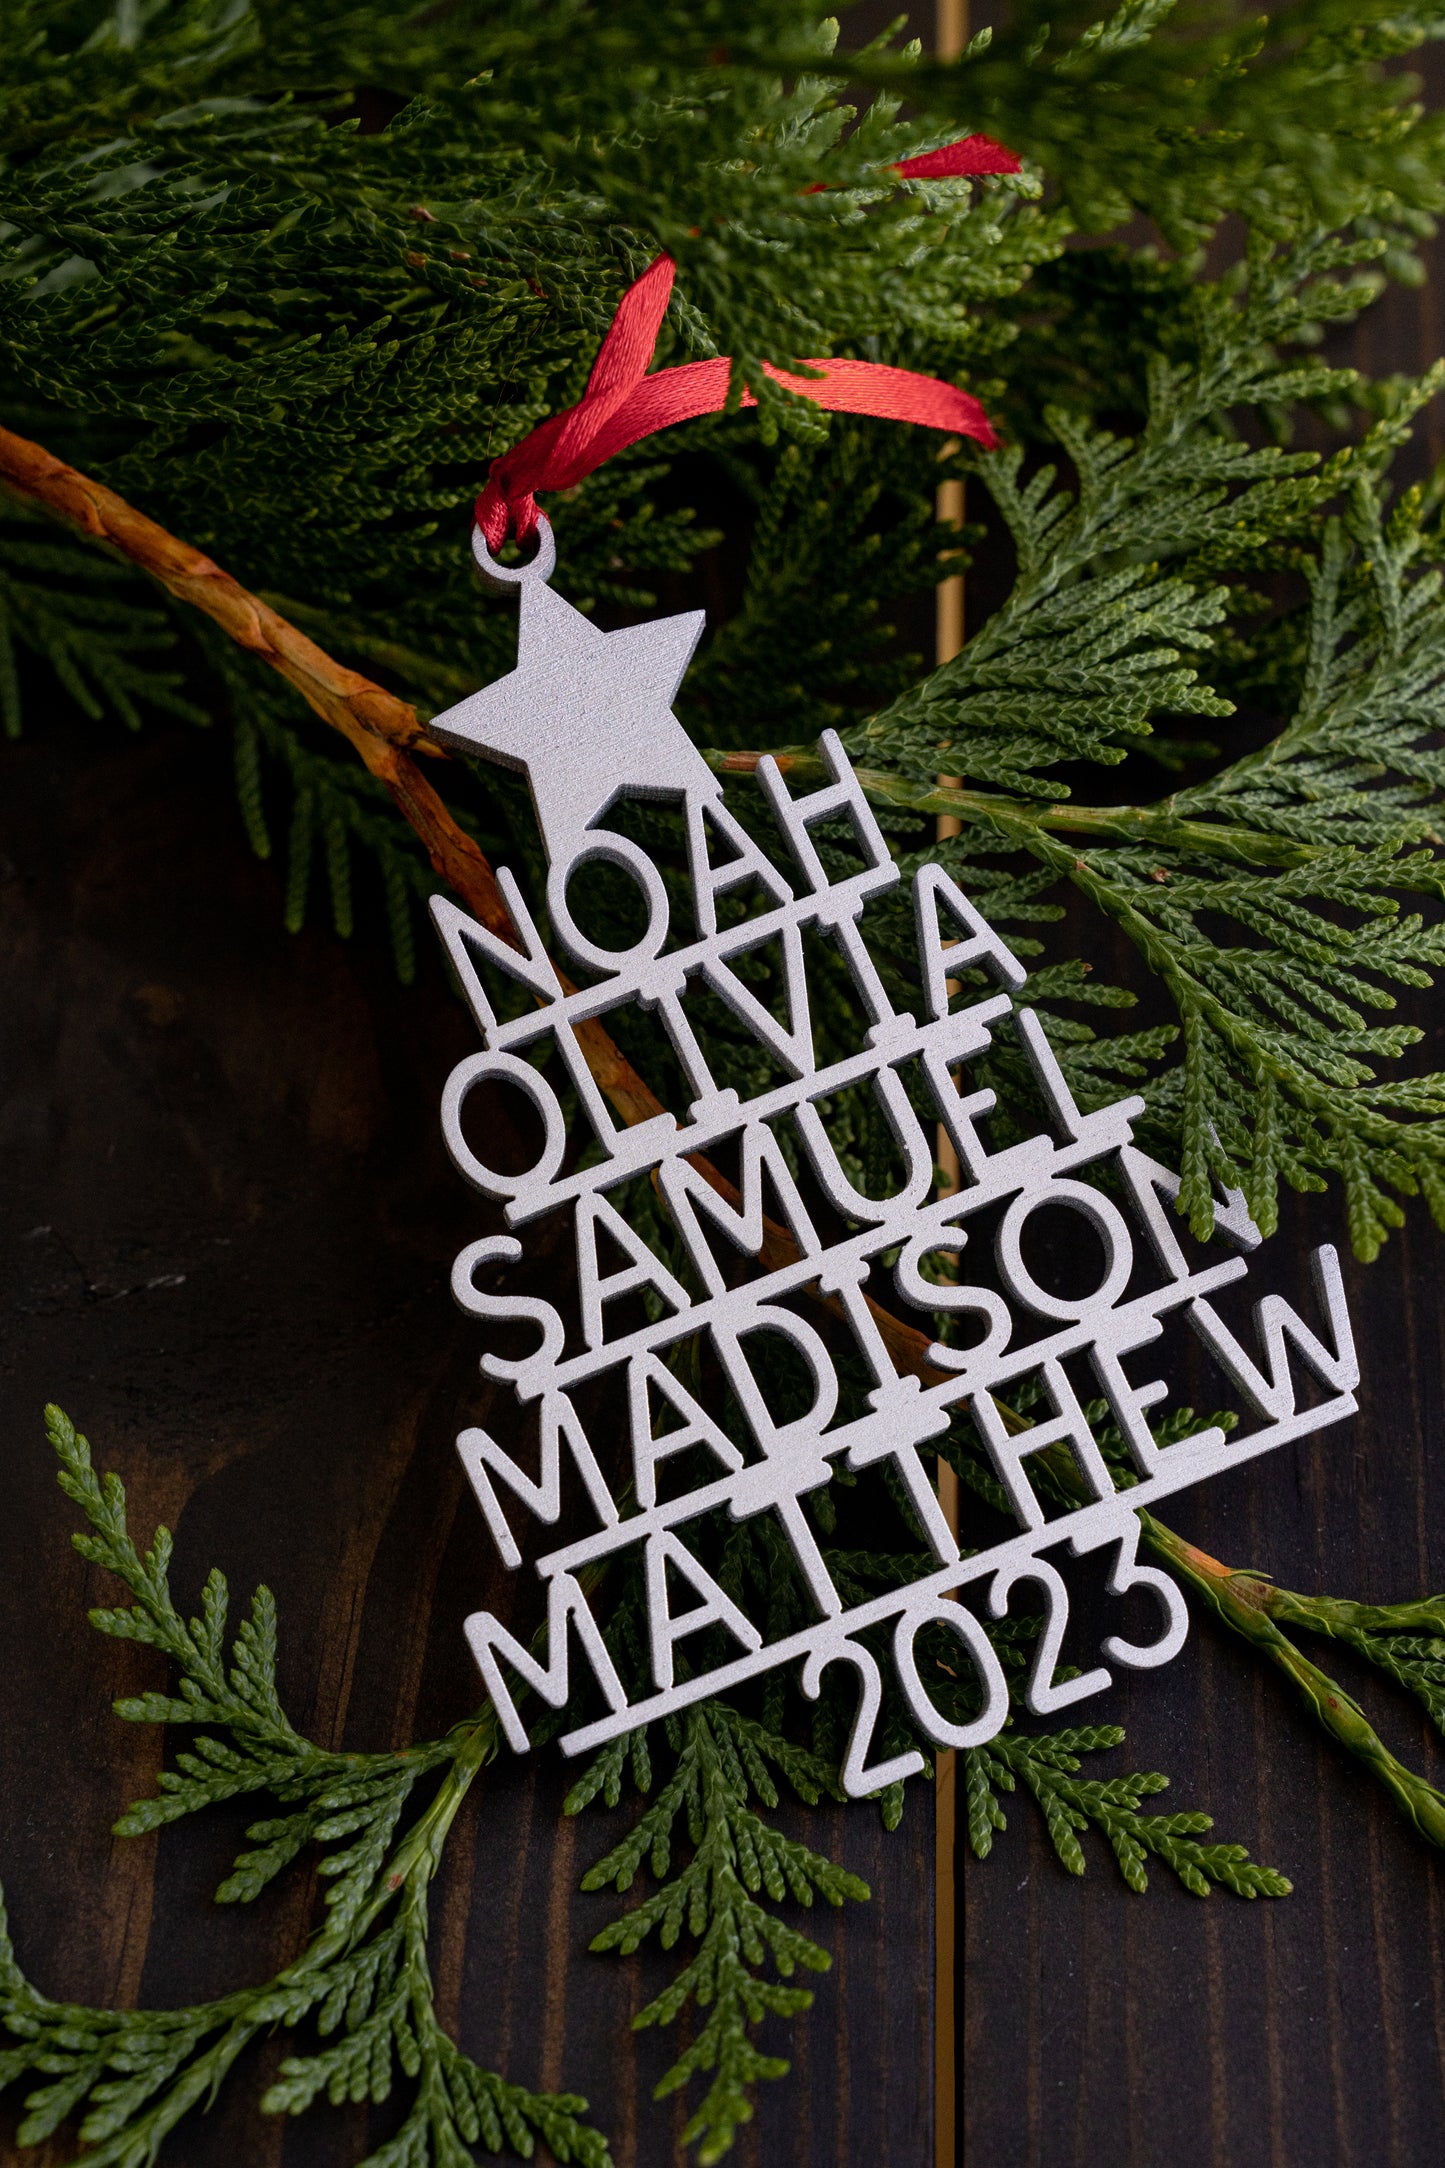 Family Christmas Ornament - Personalized Ornament With Names